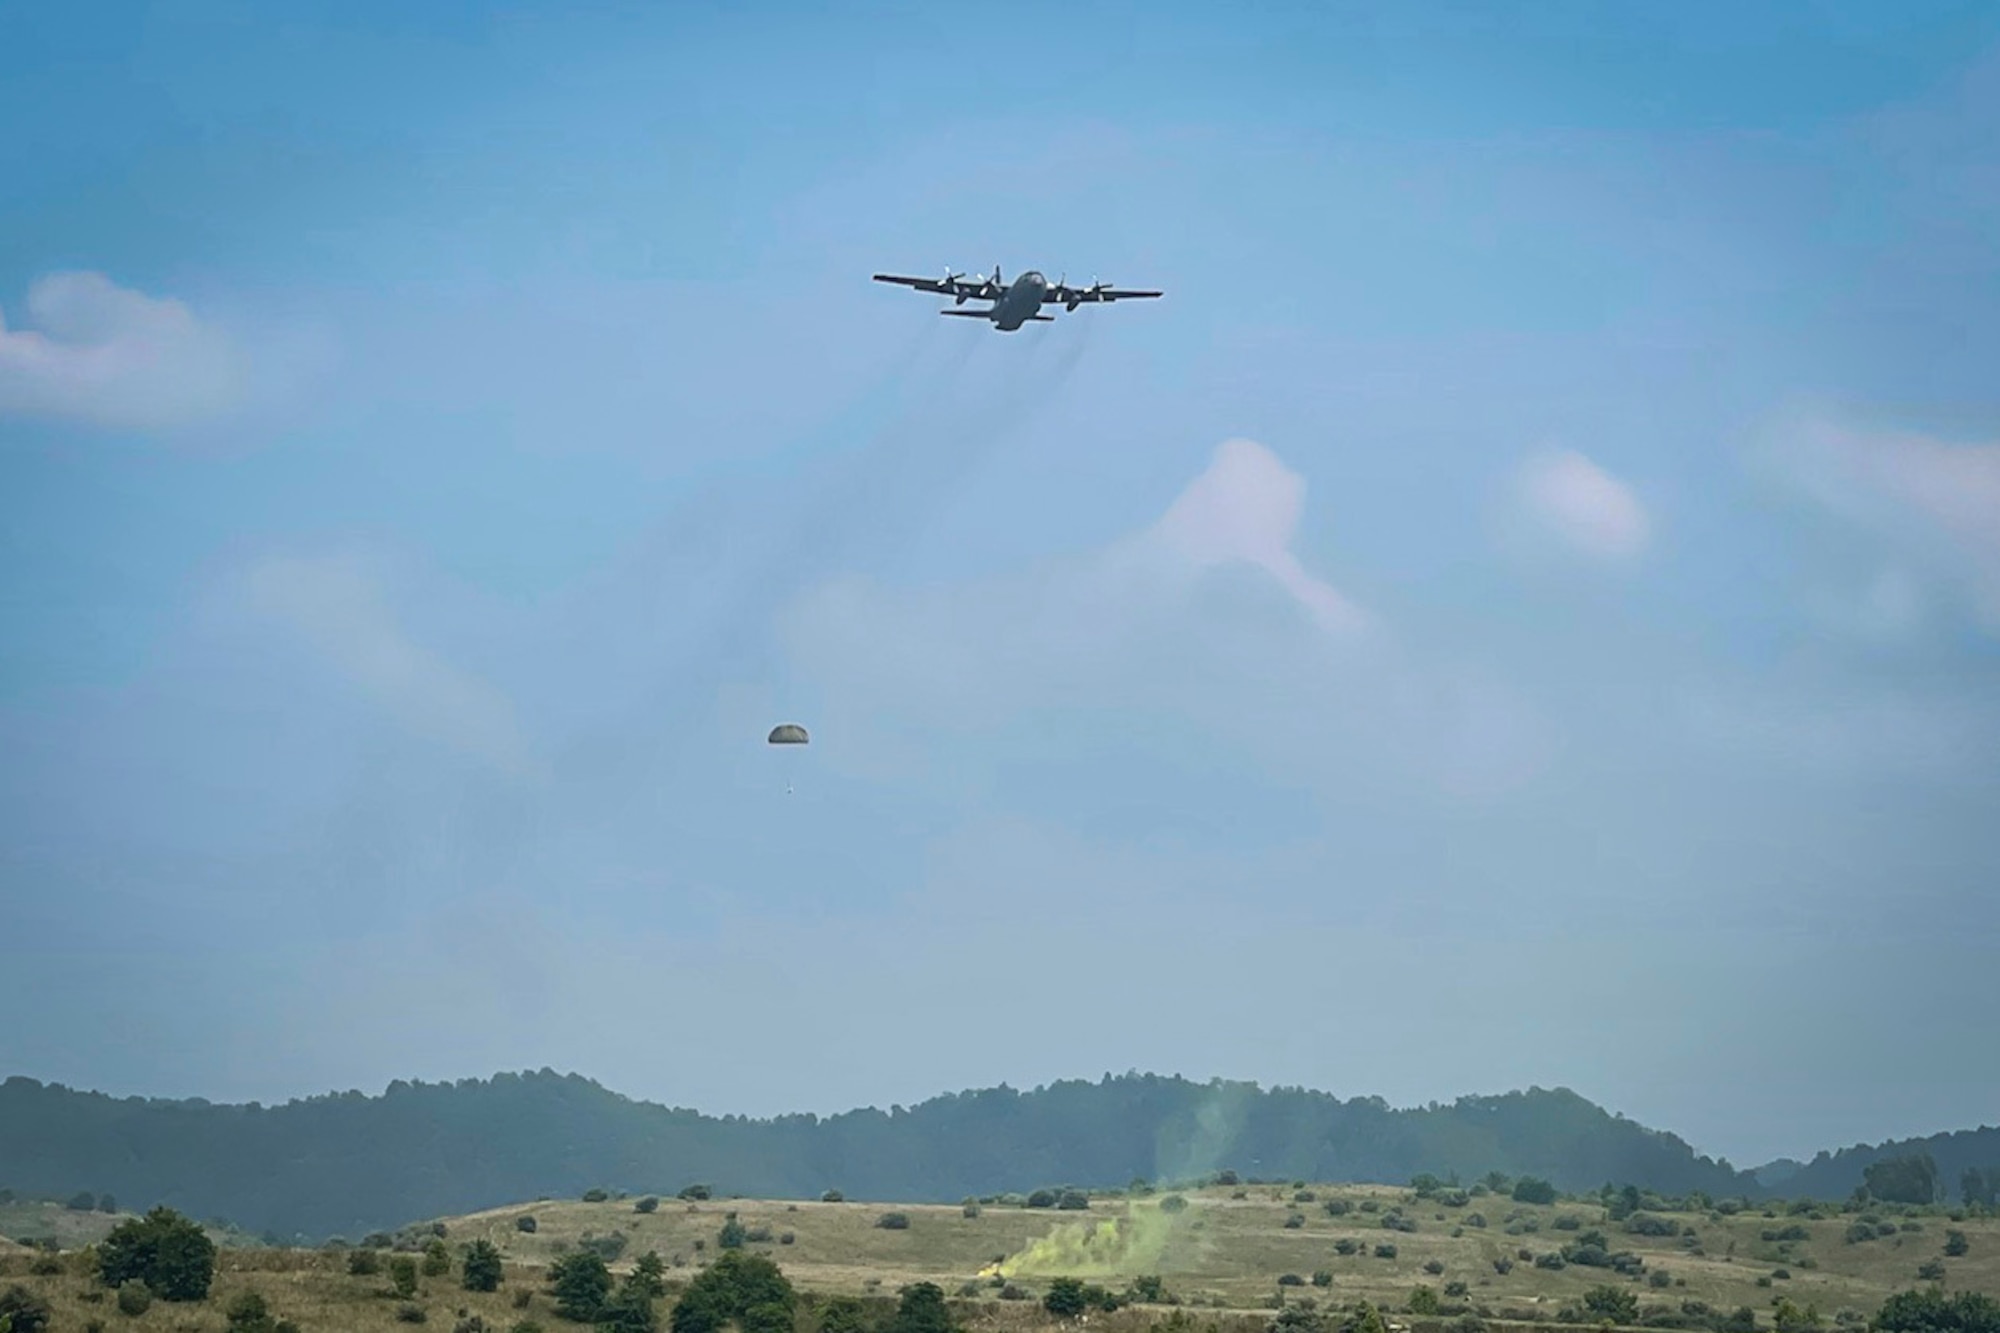 A 103rd Airlift Wing C-130H Hercules aircraft performs a Low Cost Low Altitude airdrop during Exercise Sentry Storm 2021 at Camp Branch, West Virginia, July 20, 2021. Sentry Storm is a joint training environment enabling participants to exercise their skills to prevail over near-peer competitors while applying Agile Combat Employment concepts. (Courtesy photo)